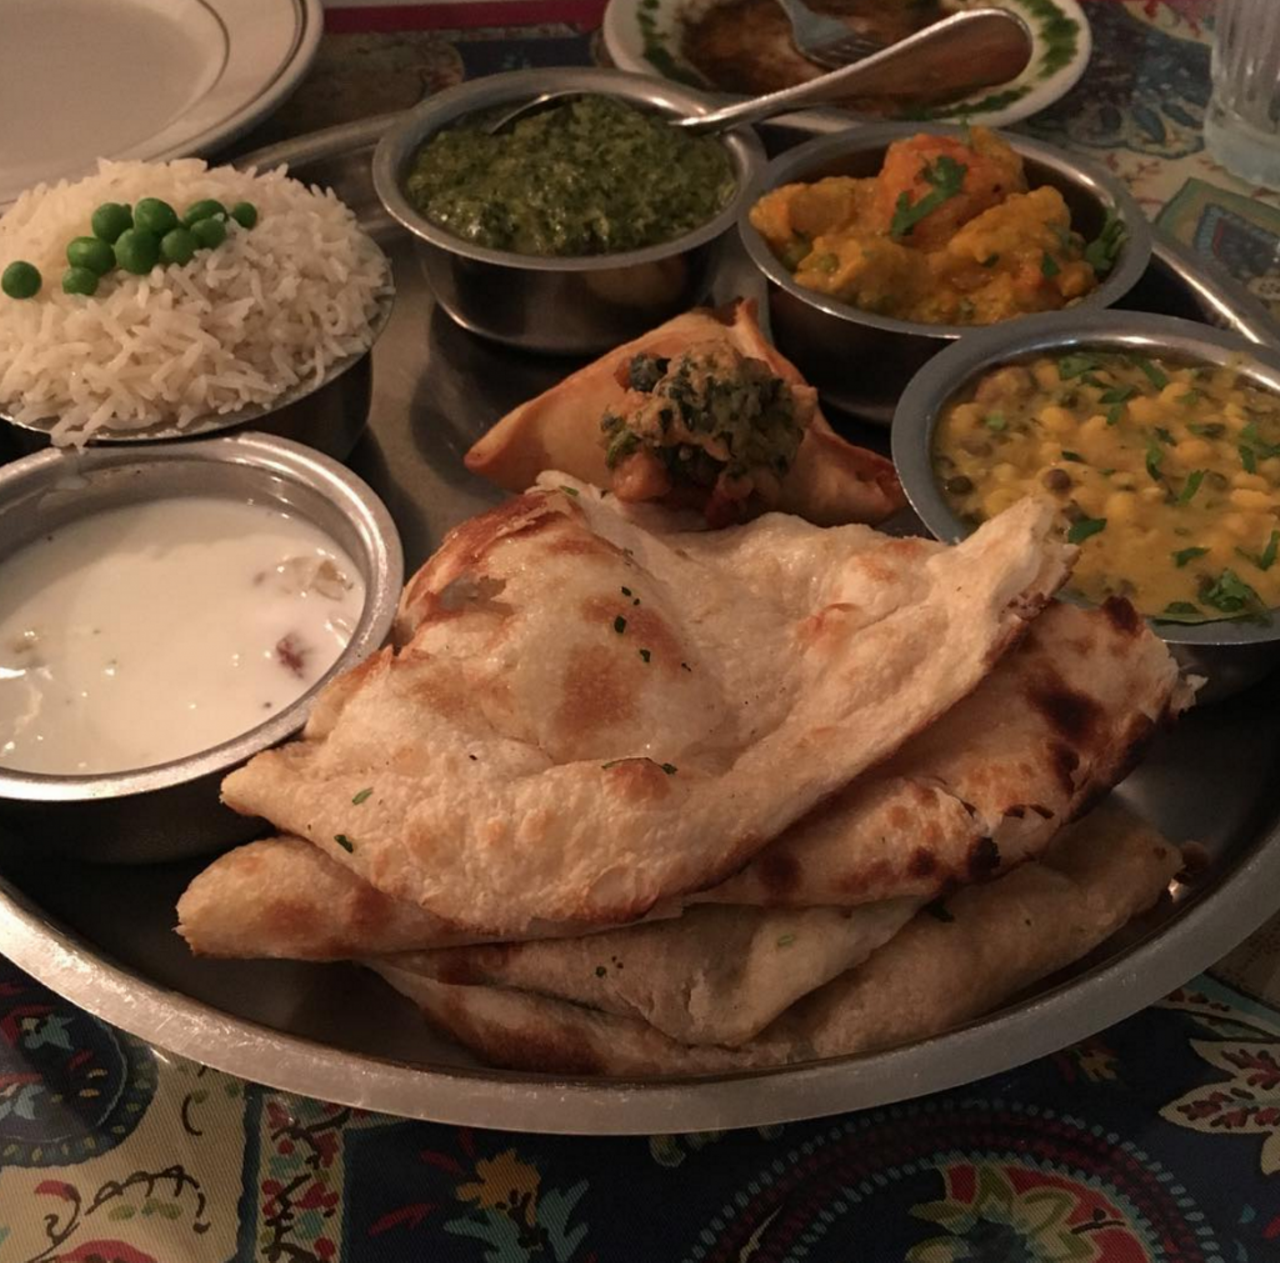  Simi's India Cuisine
4535 Fredericksburg Road, 210-737-3166, 11am-3pm, 5pm-10pm daily 
In an elegant setting with traditional Indian music playing in the background, Simi's serves several selections prepared in an authentic tandoor oven, such as the tandoori shrimp or tandoori snapper. A lunch buffet lets you sample a few of the more popular dishes, and at night, you can choose from several combination dishes. The small bar pours a decent selection of beer and wine.Photo via Instagram,  curlyfuck